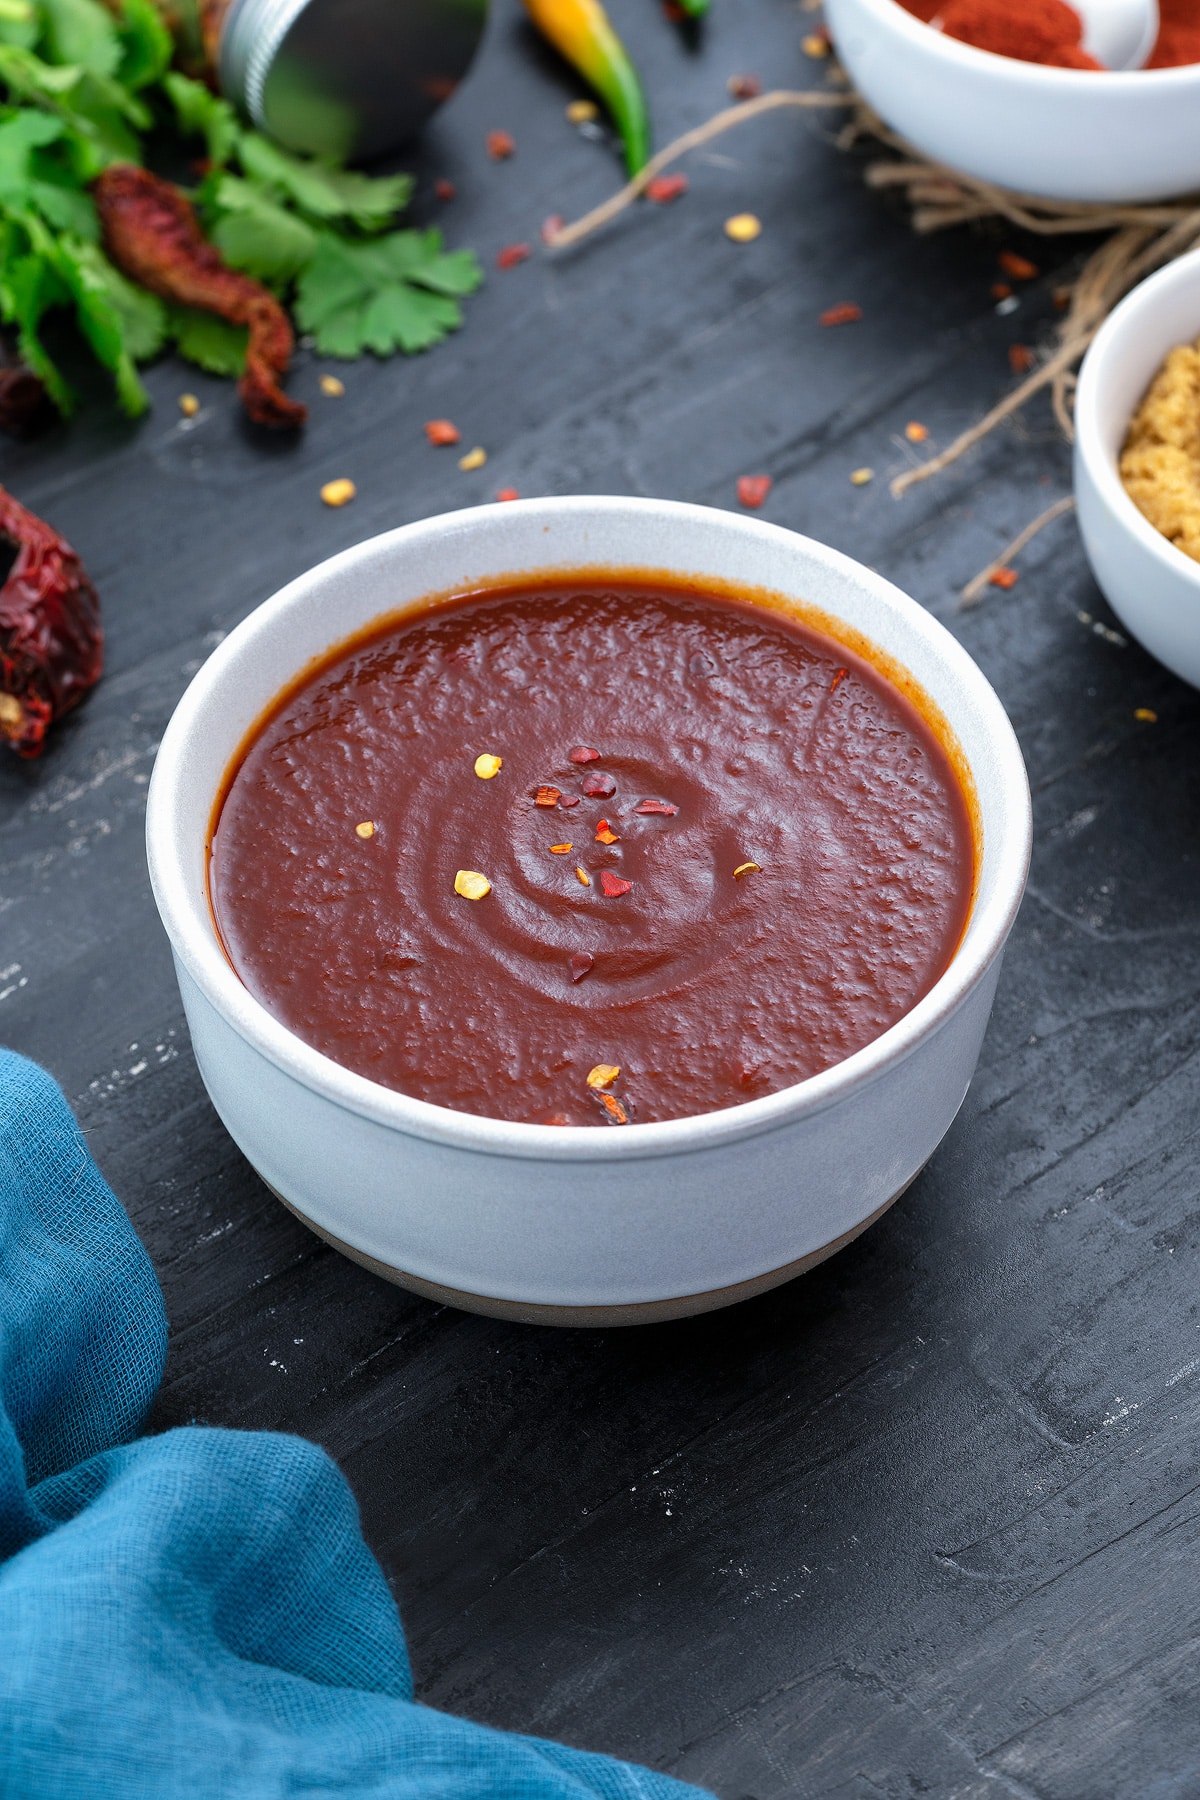 Spicy homemade chili sauce in a white bowl on a grey table with few ingredients around.